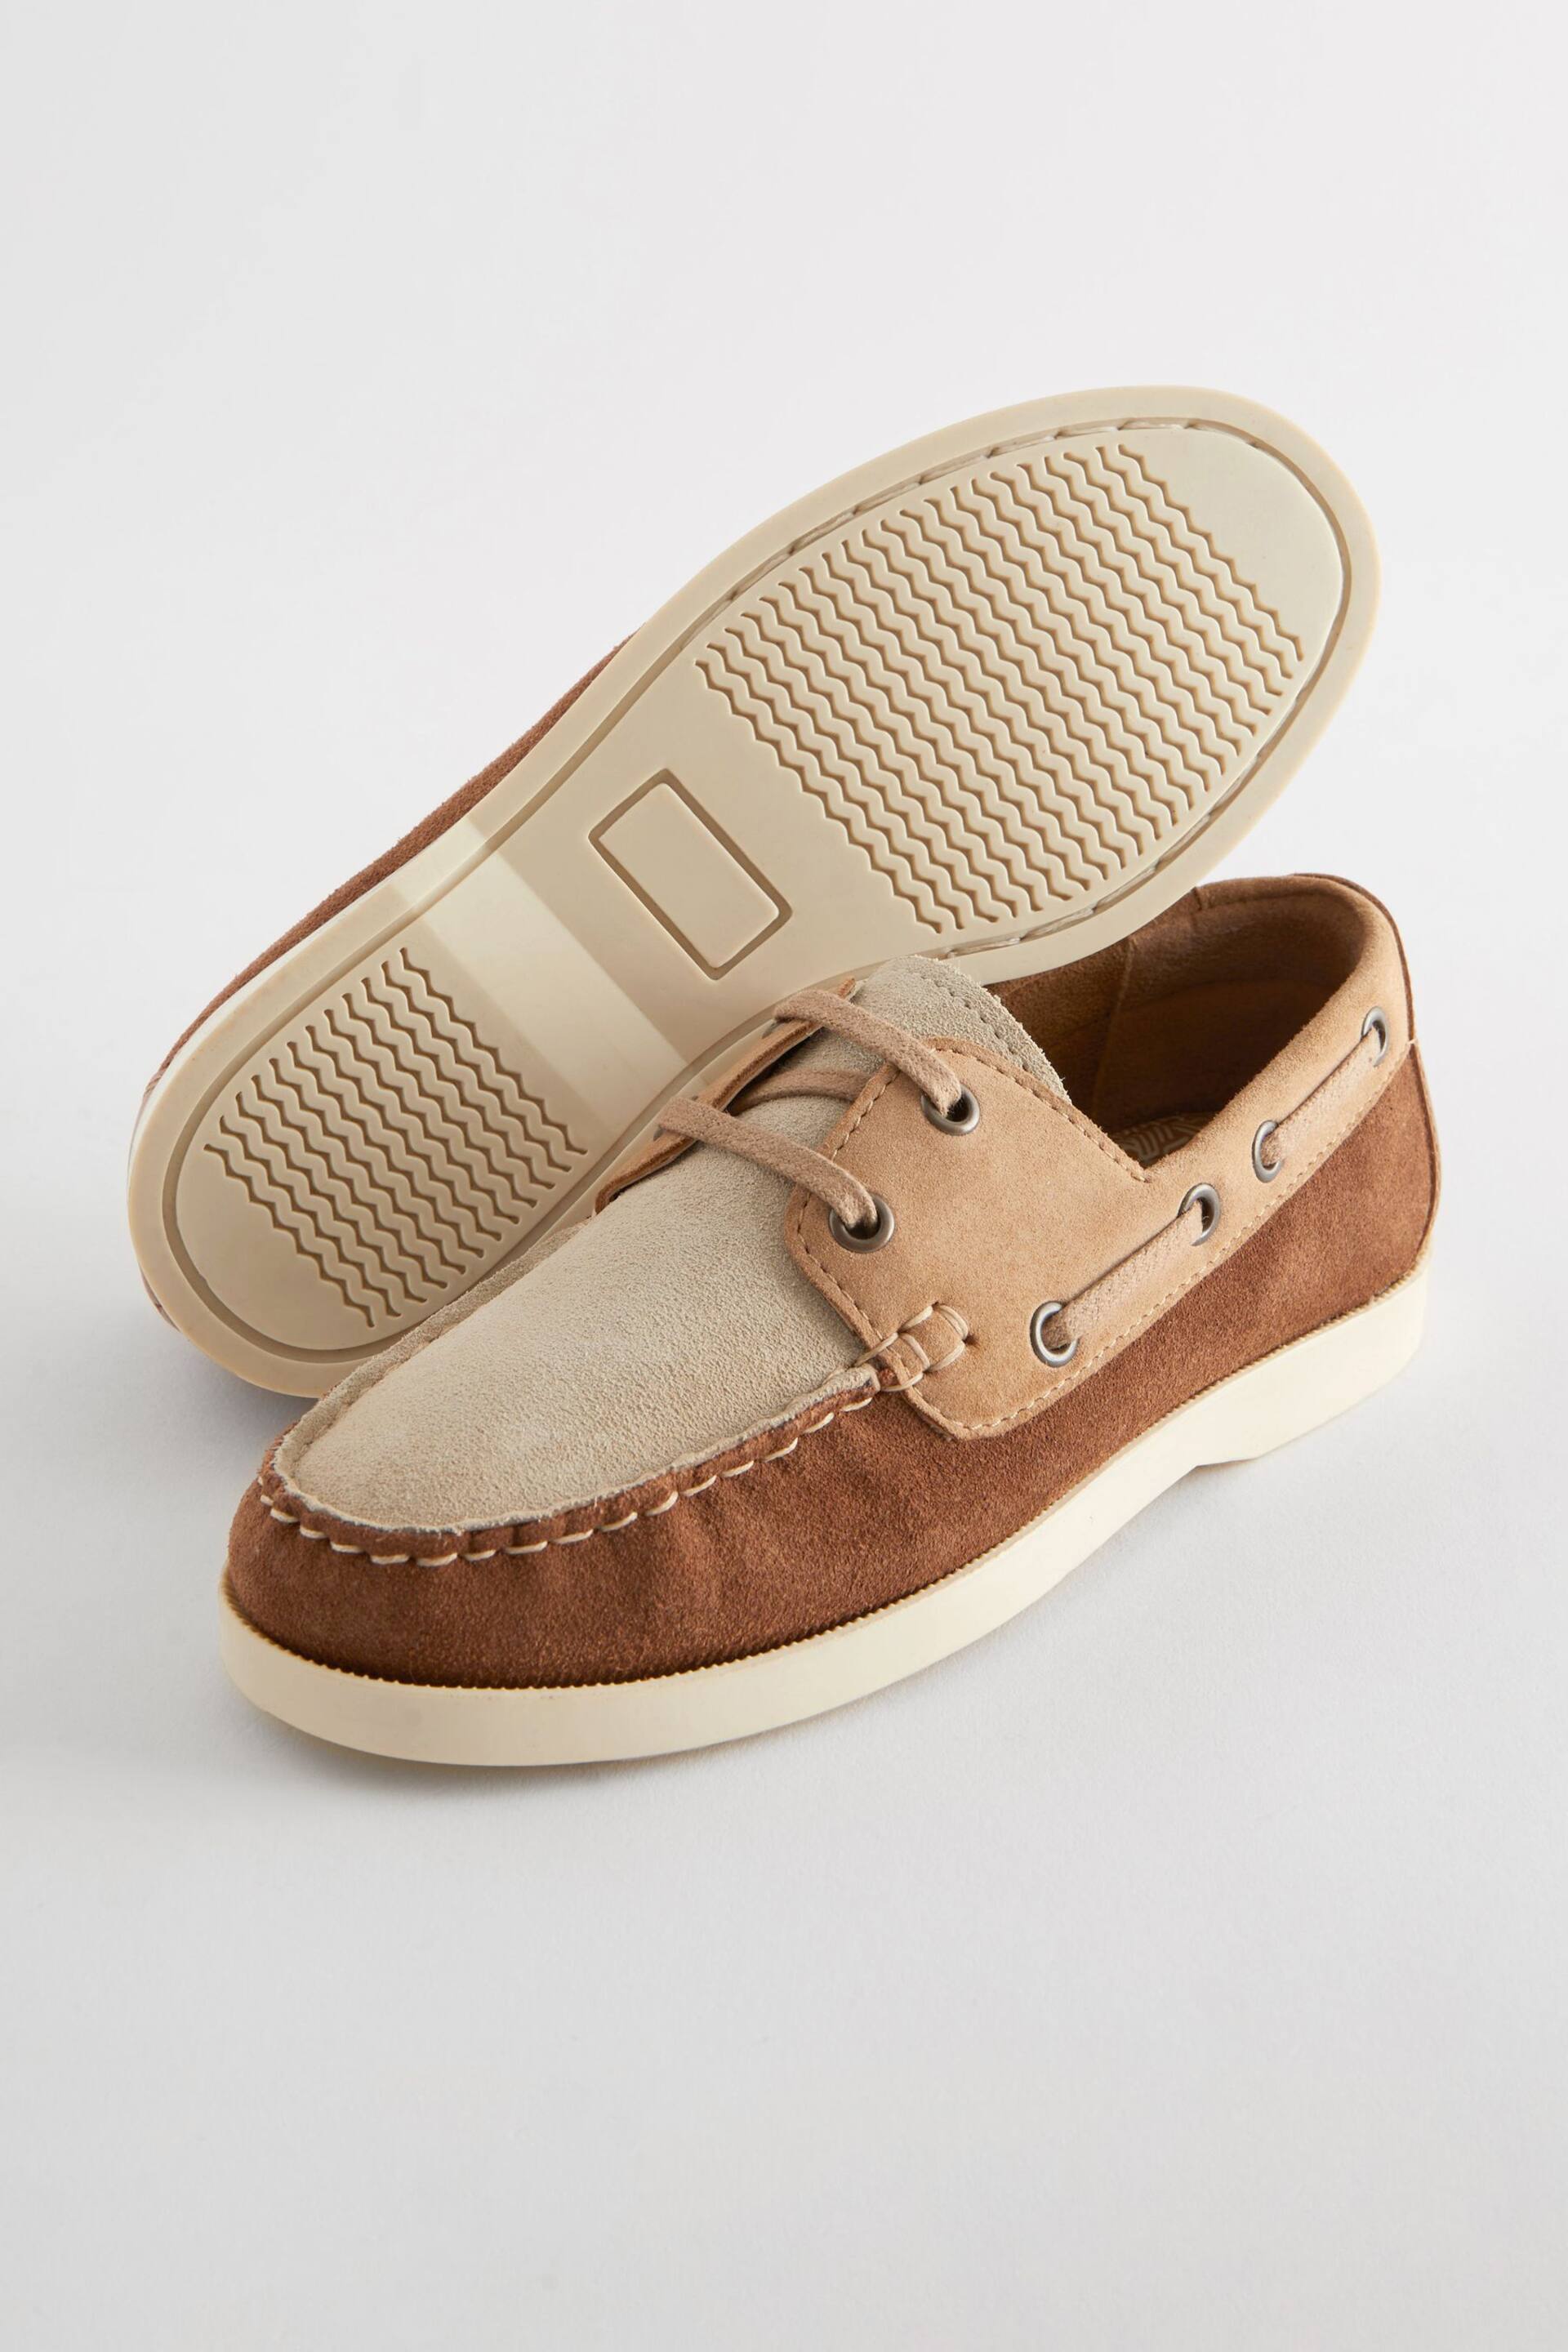 Neutral Leather Boat Shoes - Image 3 of 5